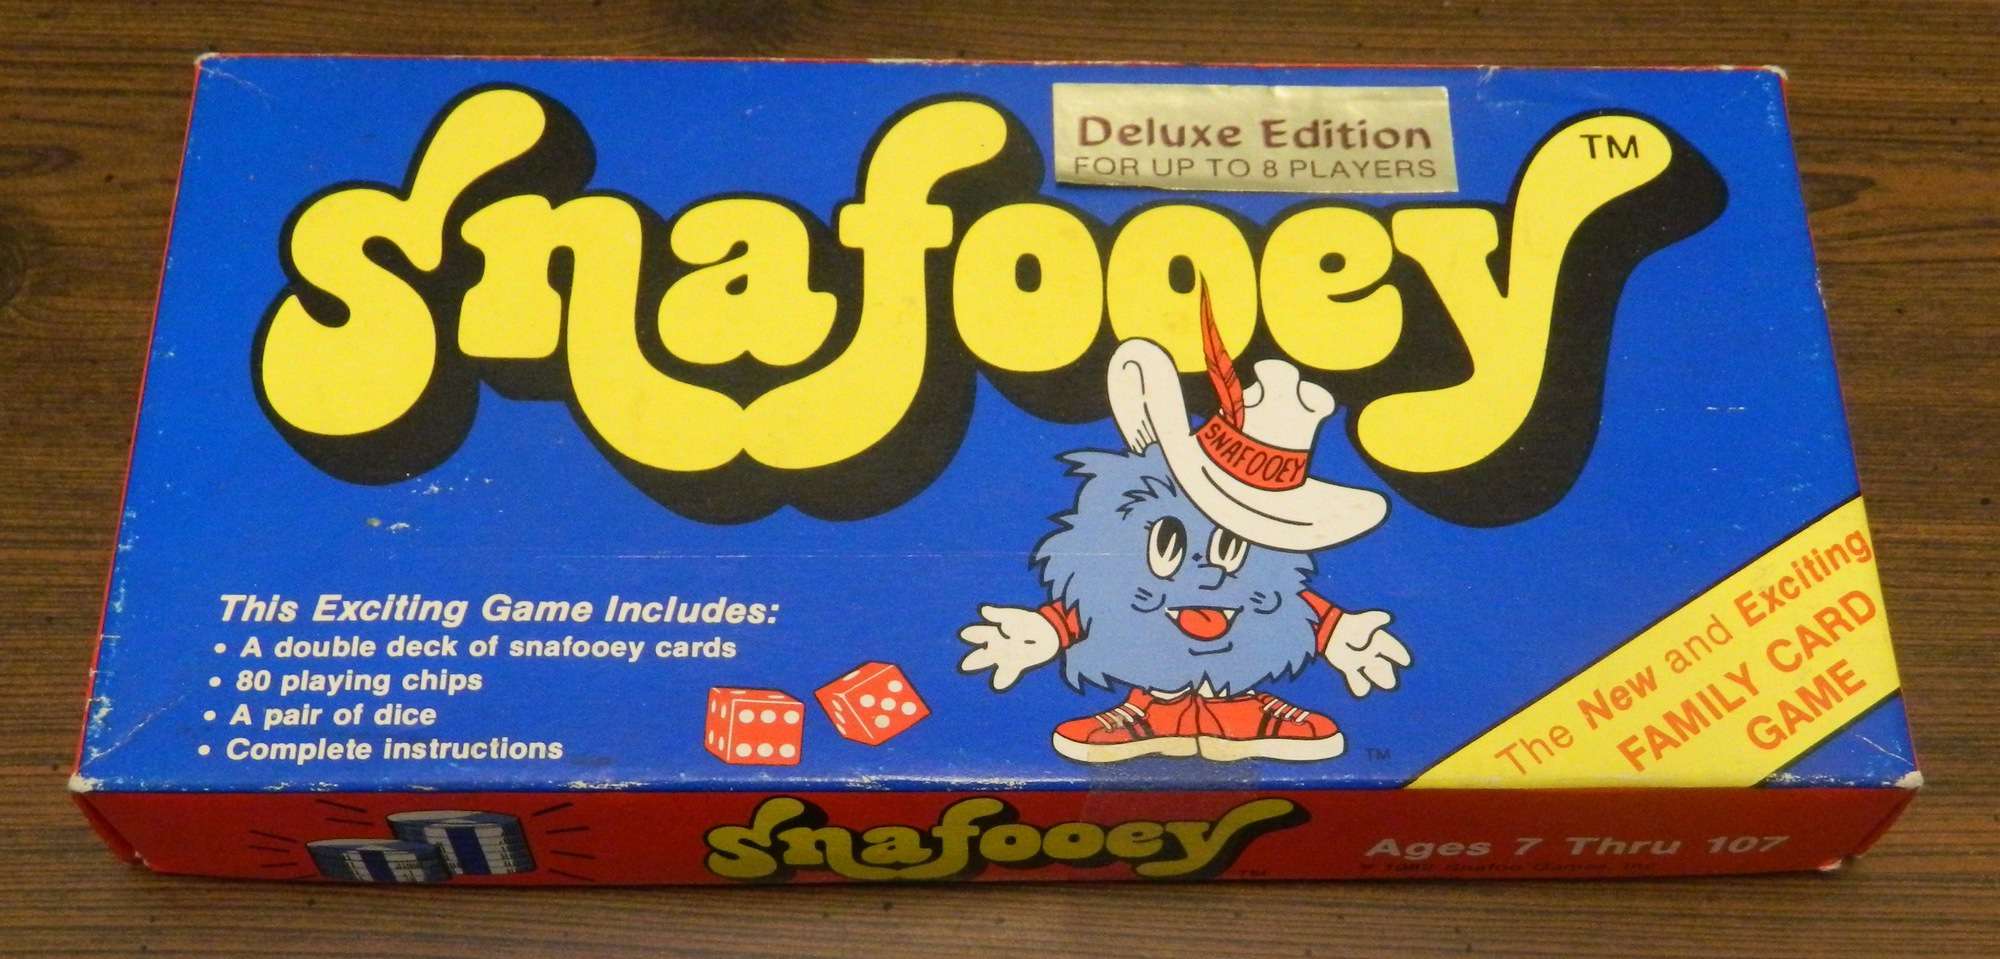 Snafooey Card Game Review and Rules